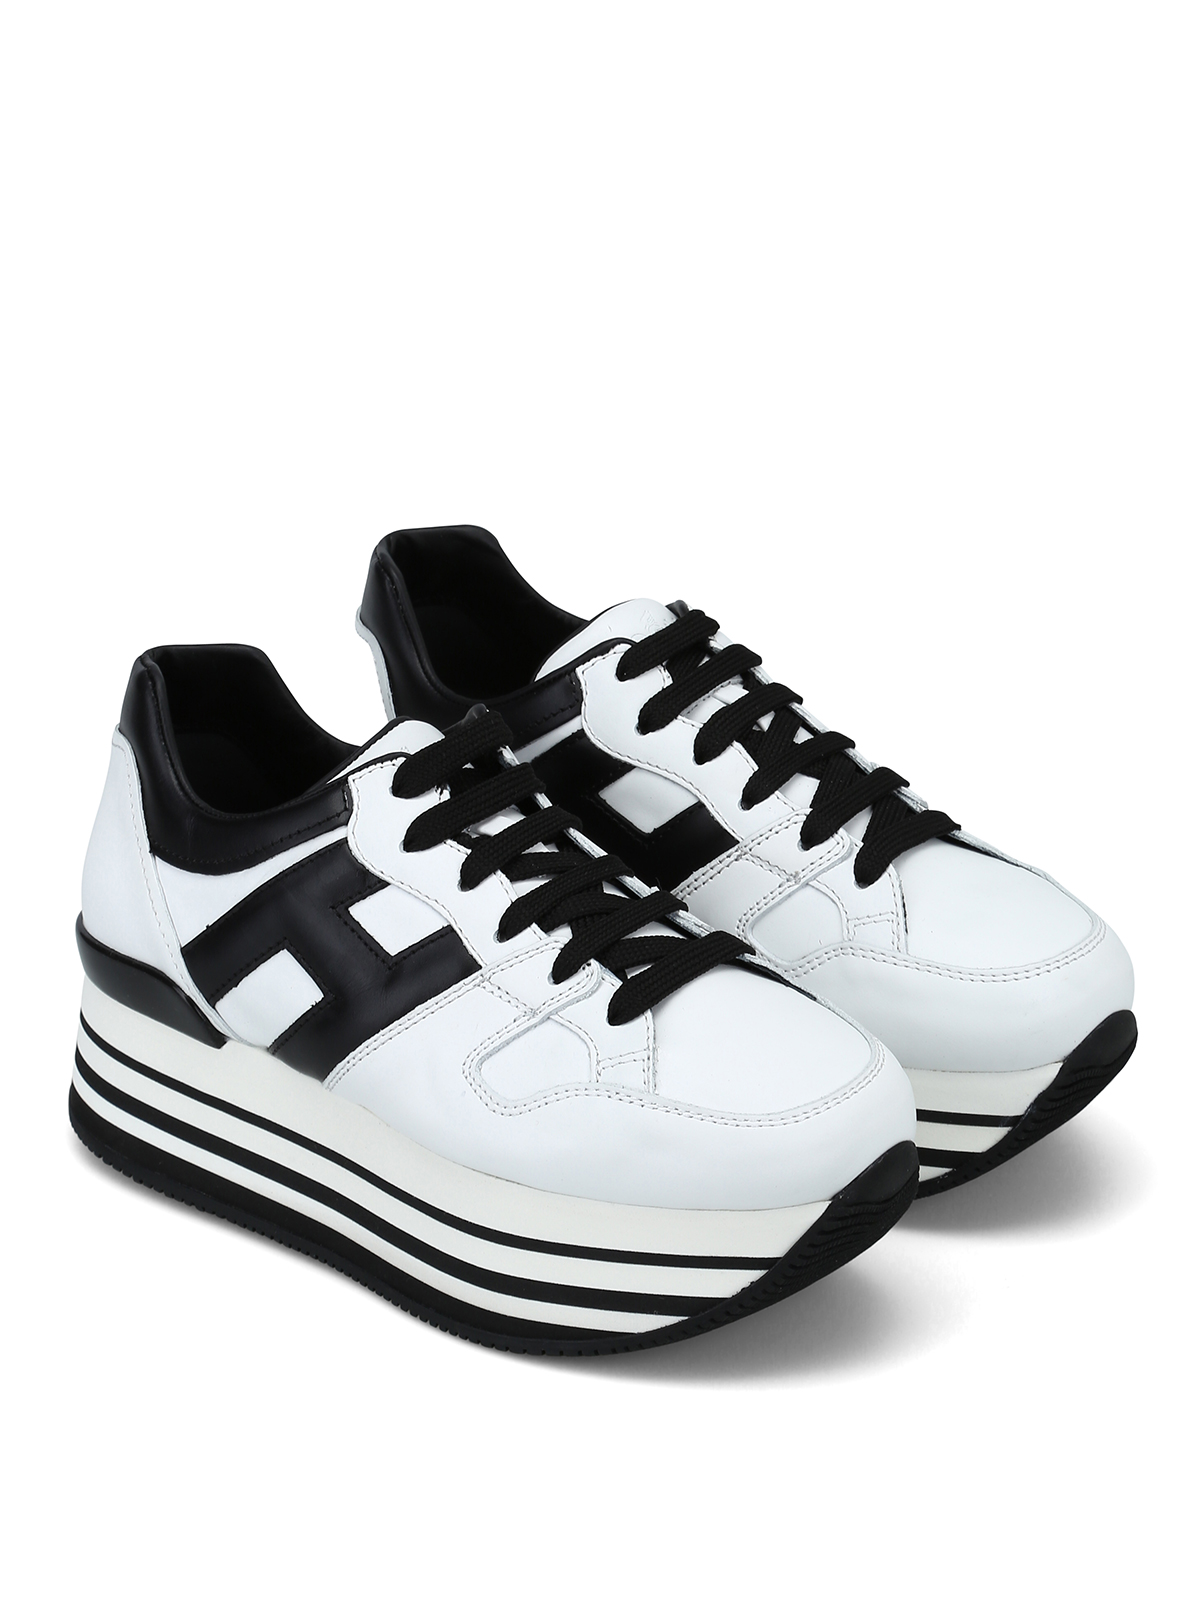 Hogan - H283 white and black leather sneakers - trainers -  HXW2830T548HQK0001